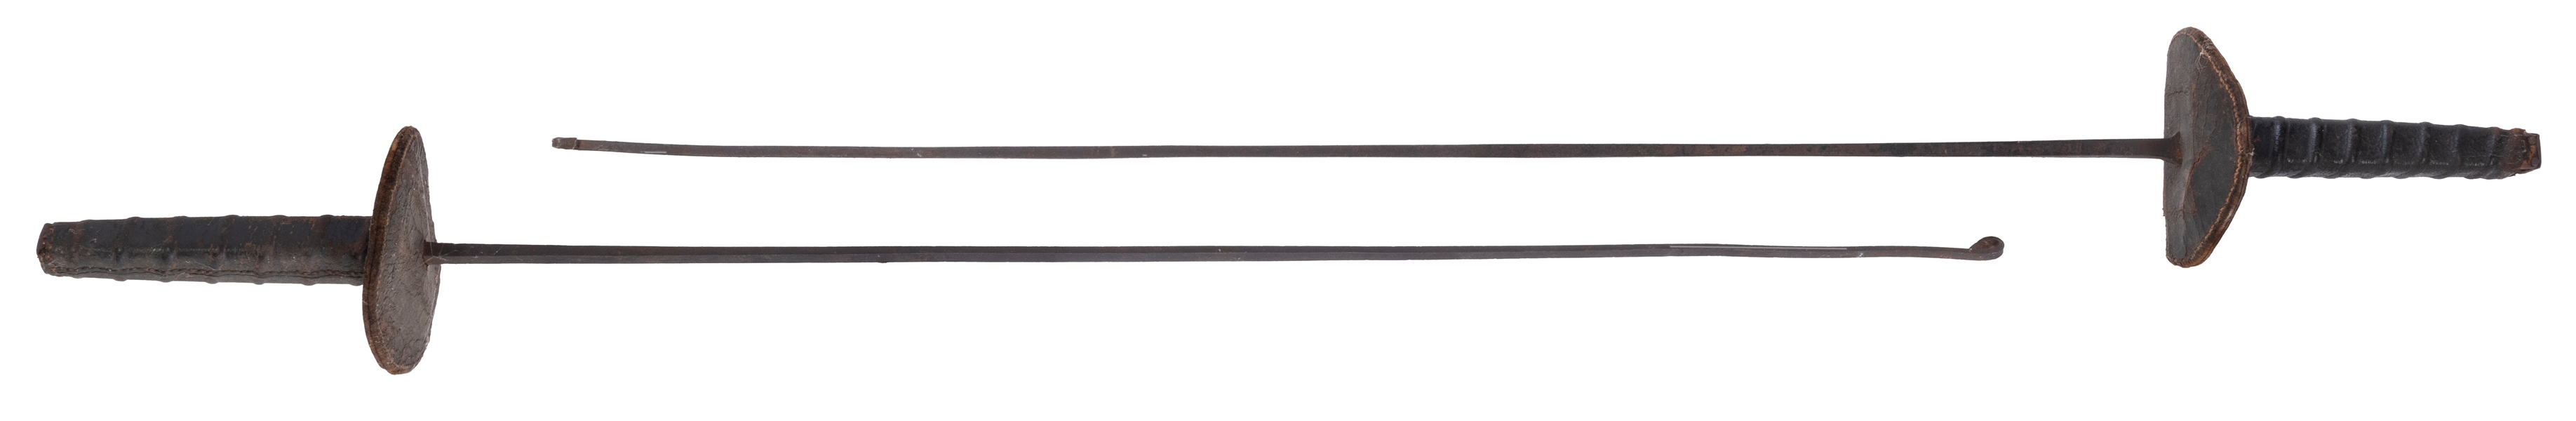  Pair of German Fencing Sabers or Foils. 19th century. Both ...